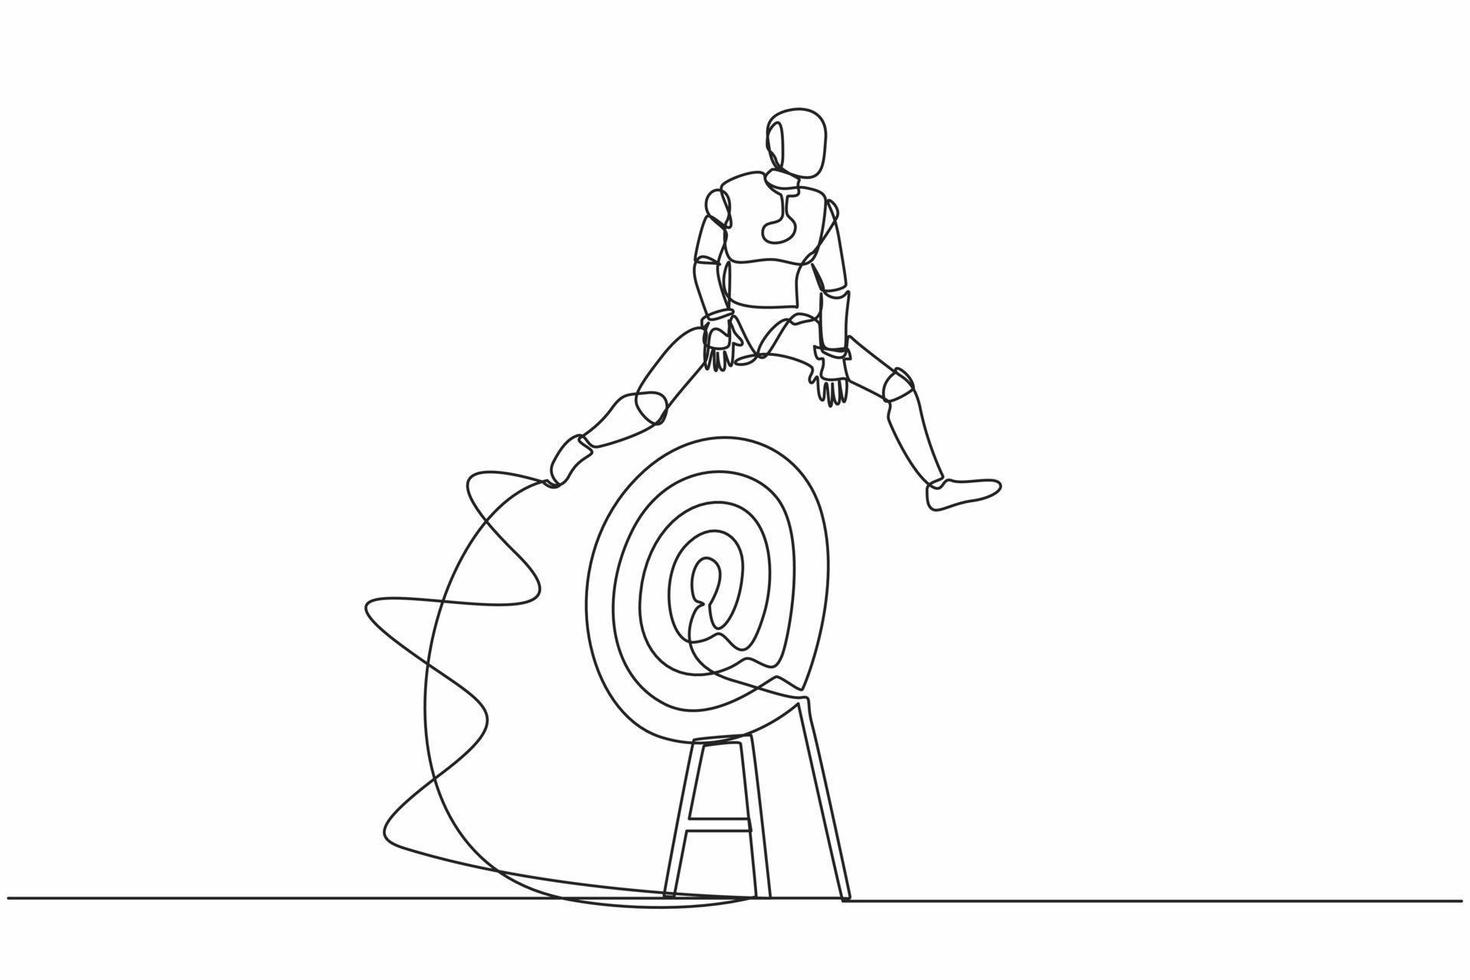 Single one line drawing robot jumping on big archery bullseye target. Achievement target goals. Future technology development. Artificial intelligence. Continuous line draw design vector illustration